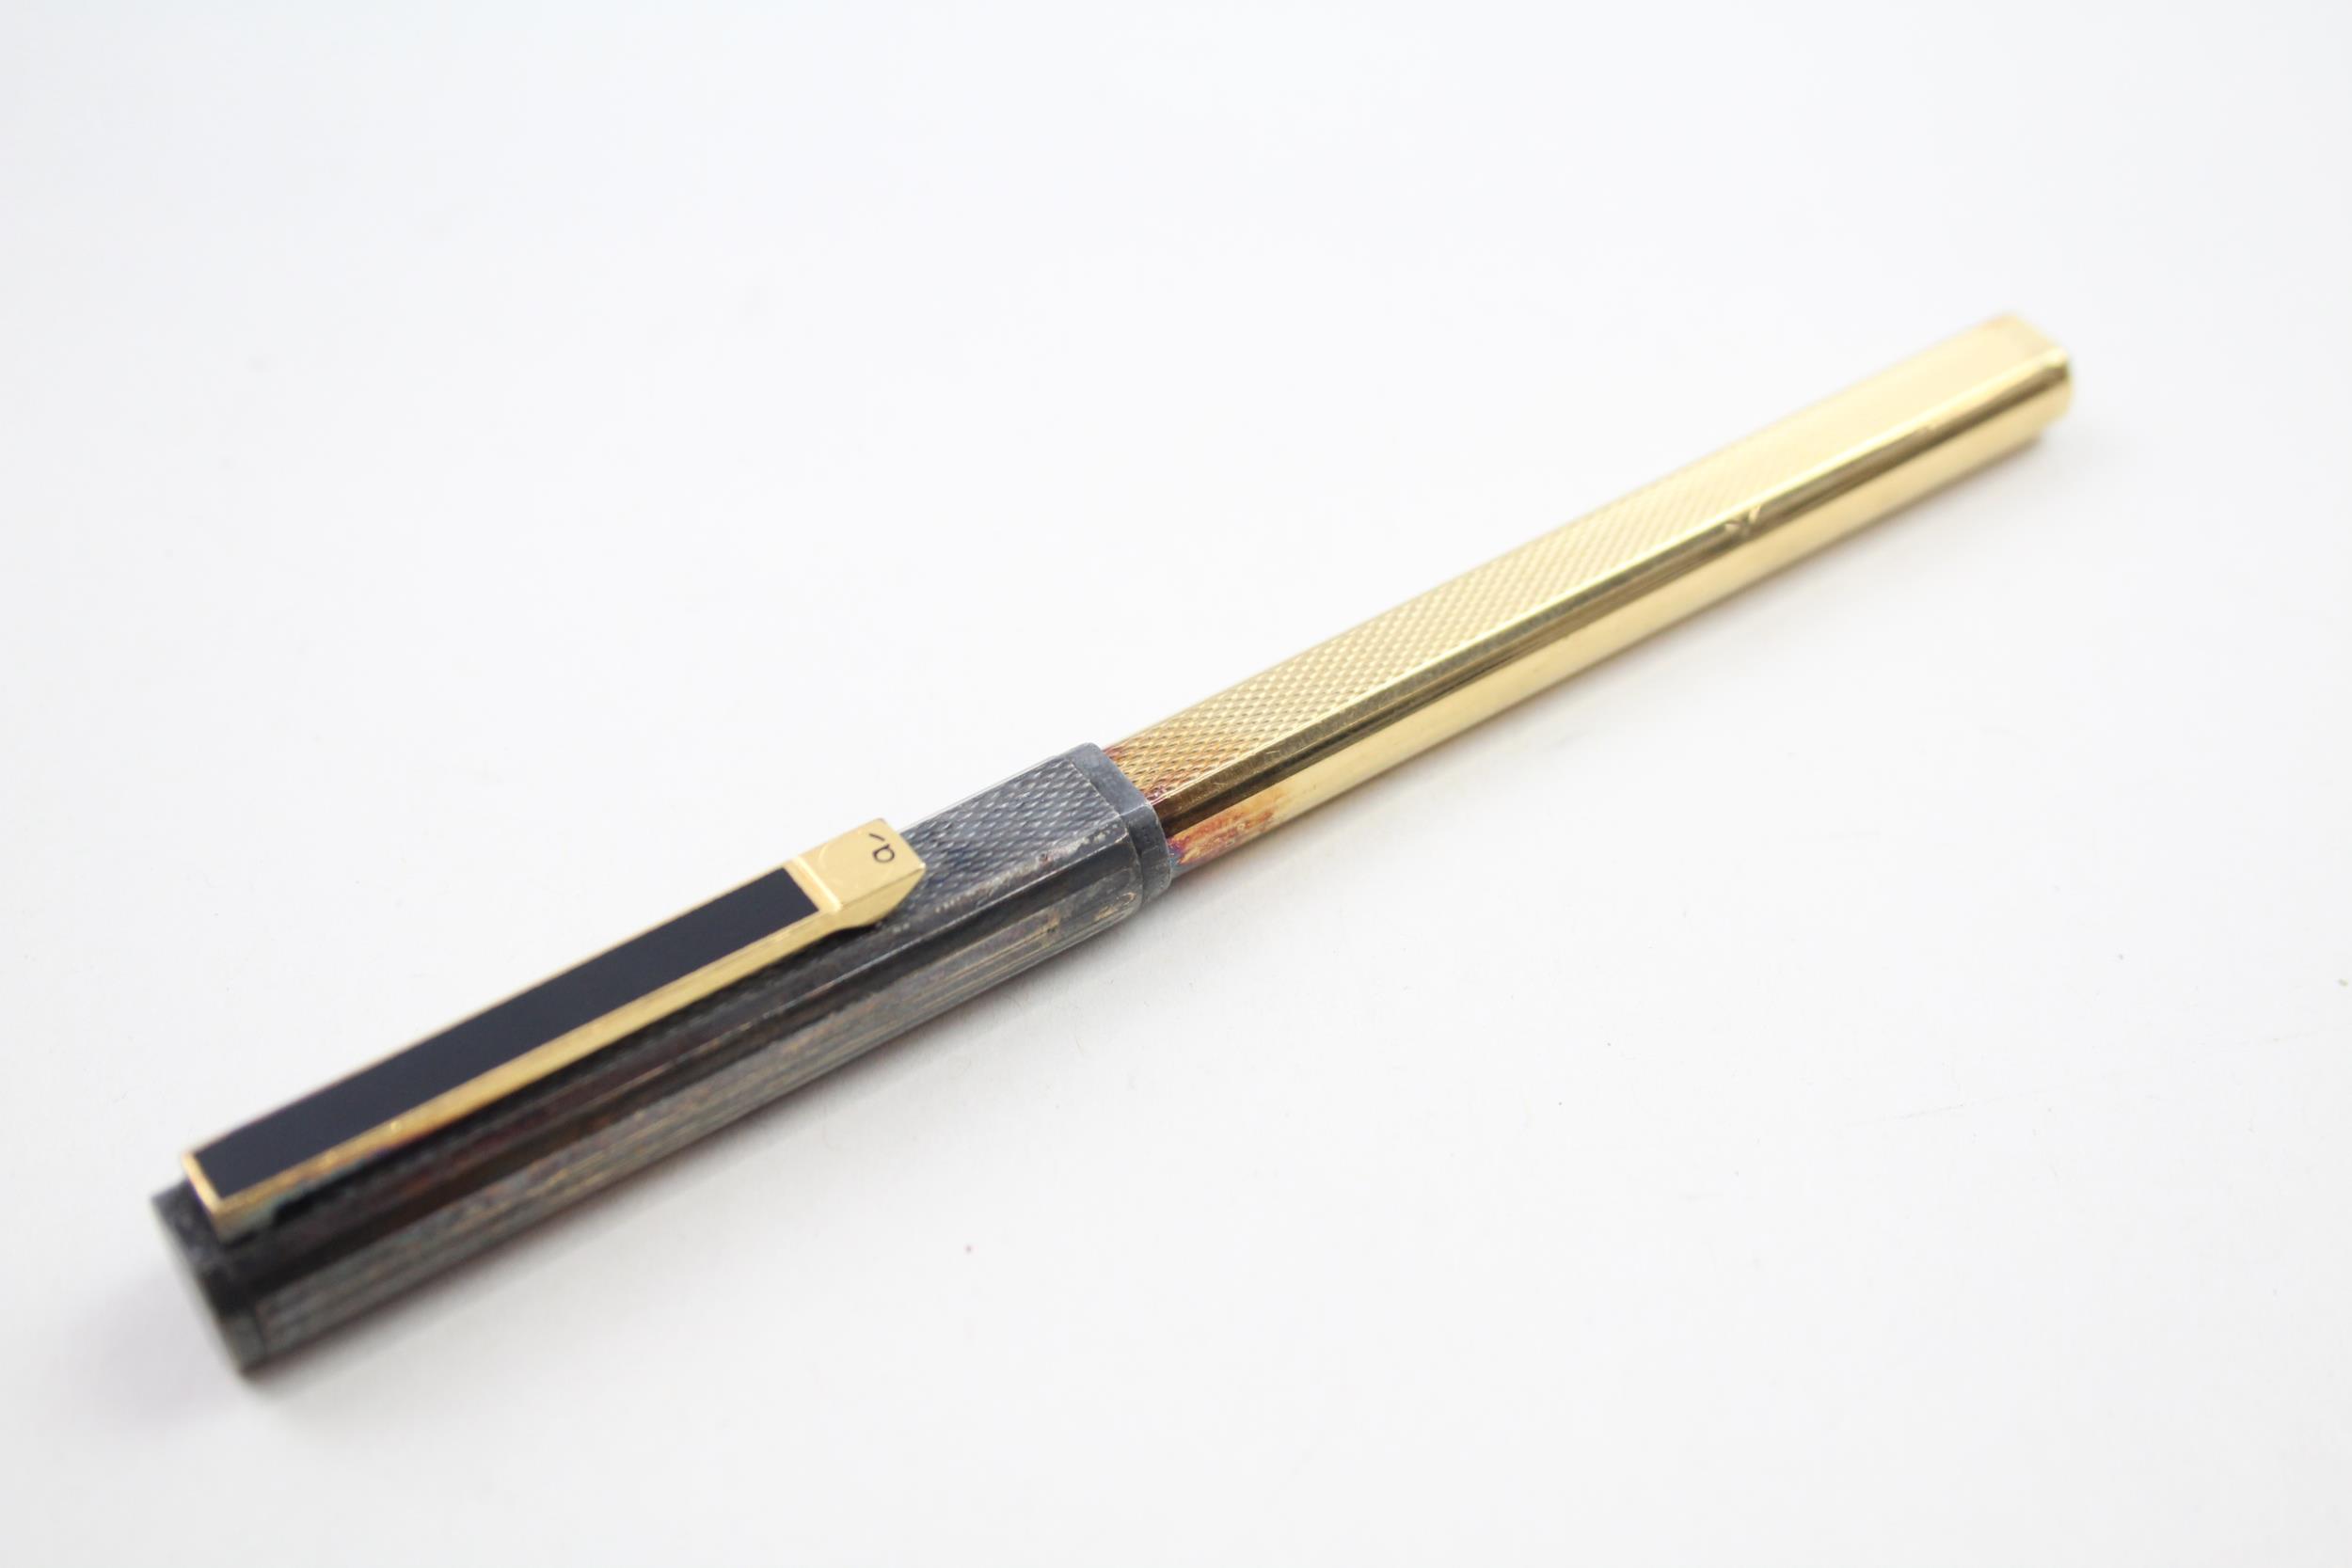 Vintage DUNHILL Gold Plated Ballpoint Biro Pen w/ .925 Sterling Silver Cap (29g) - WRITING In - Image 7 of 8